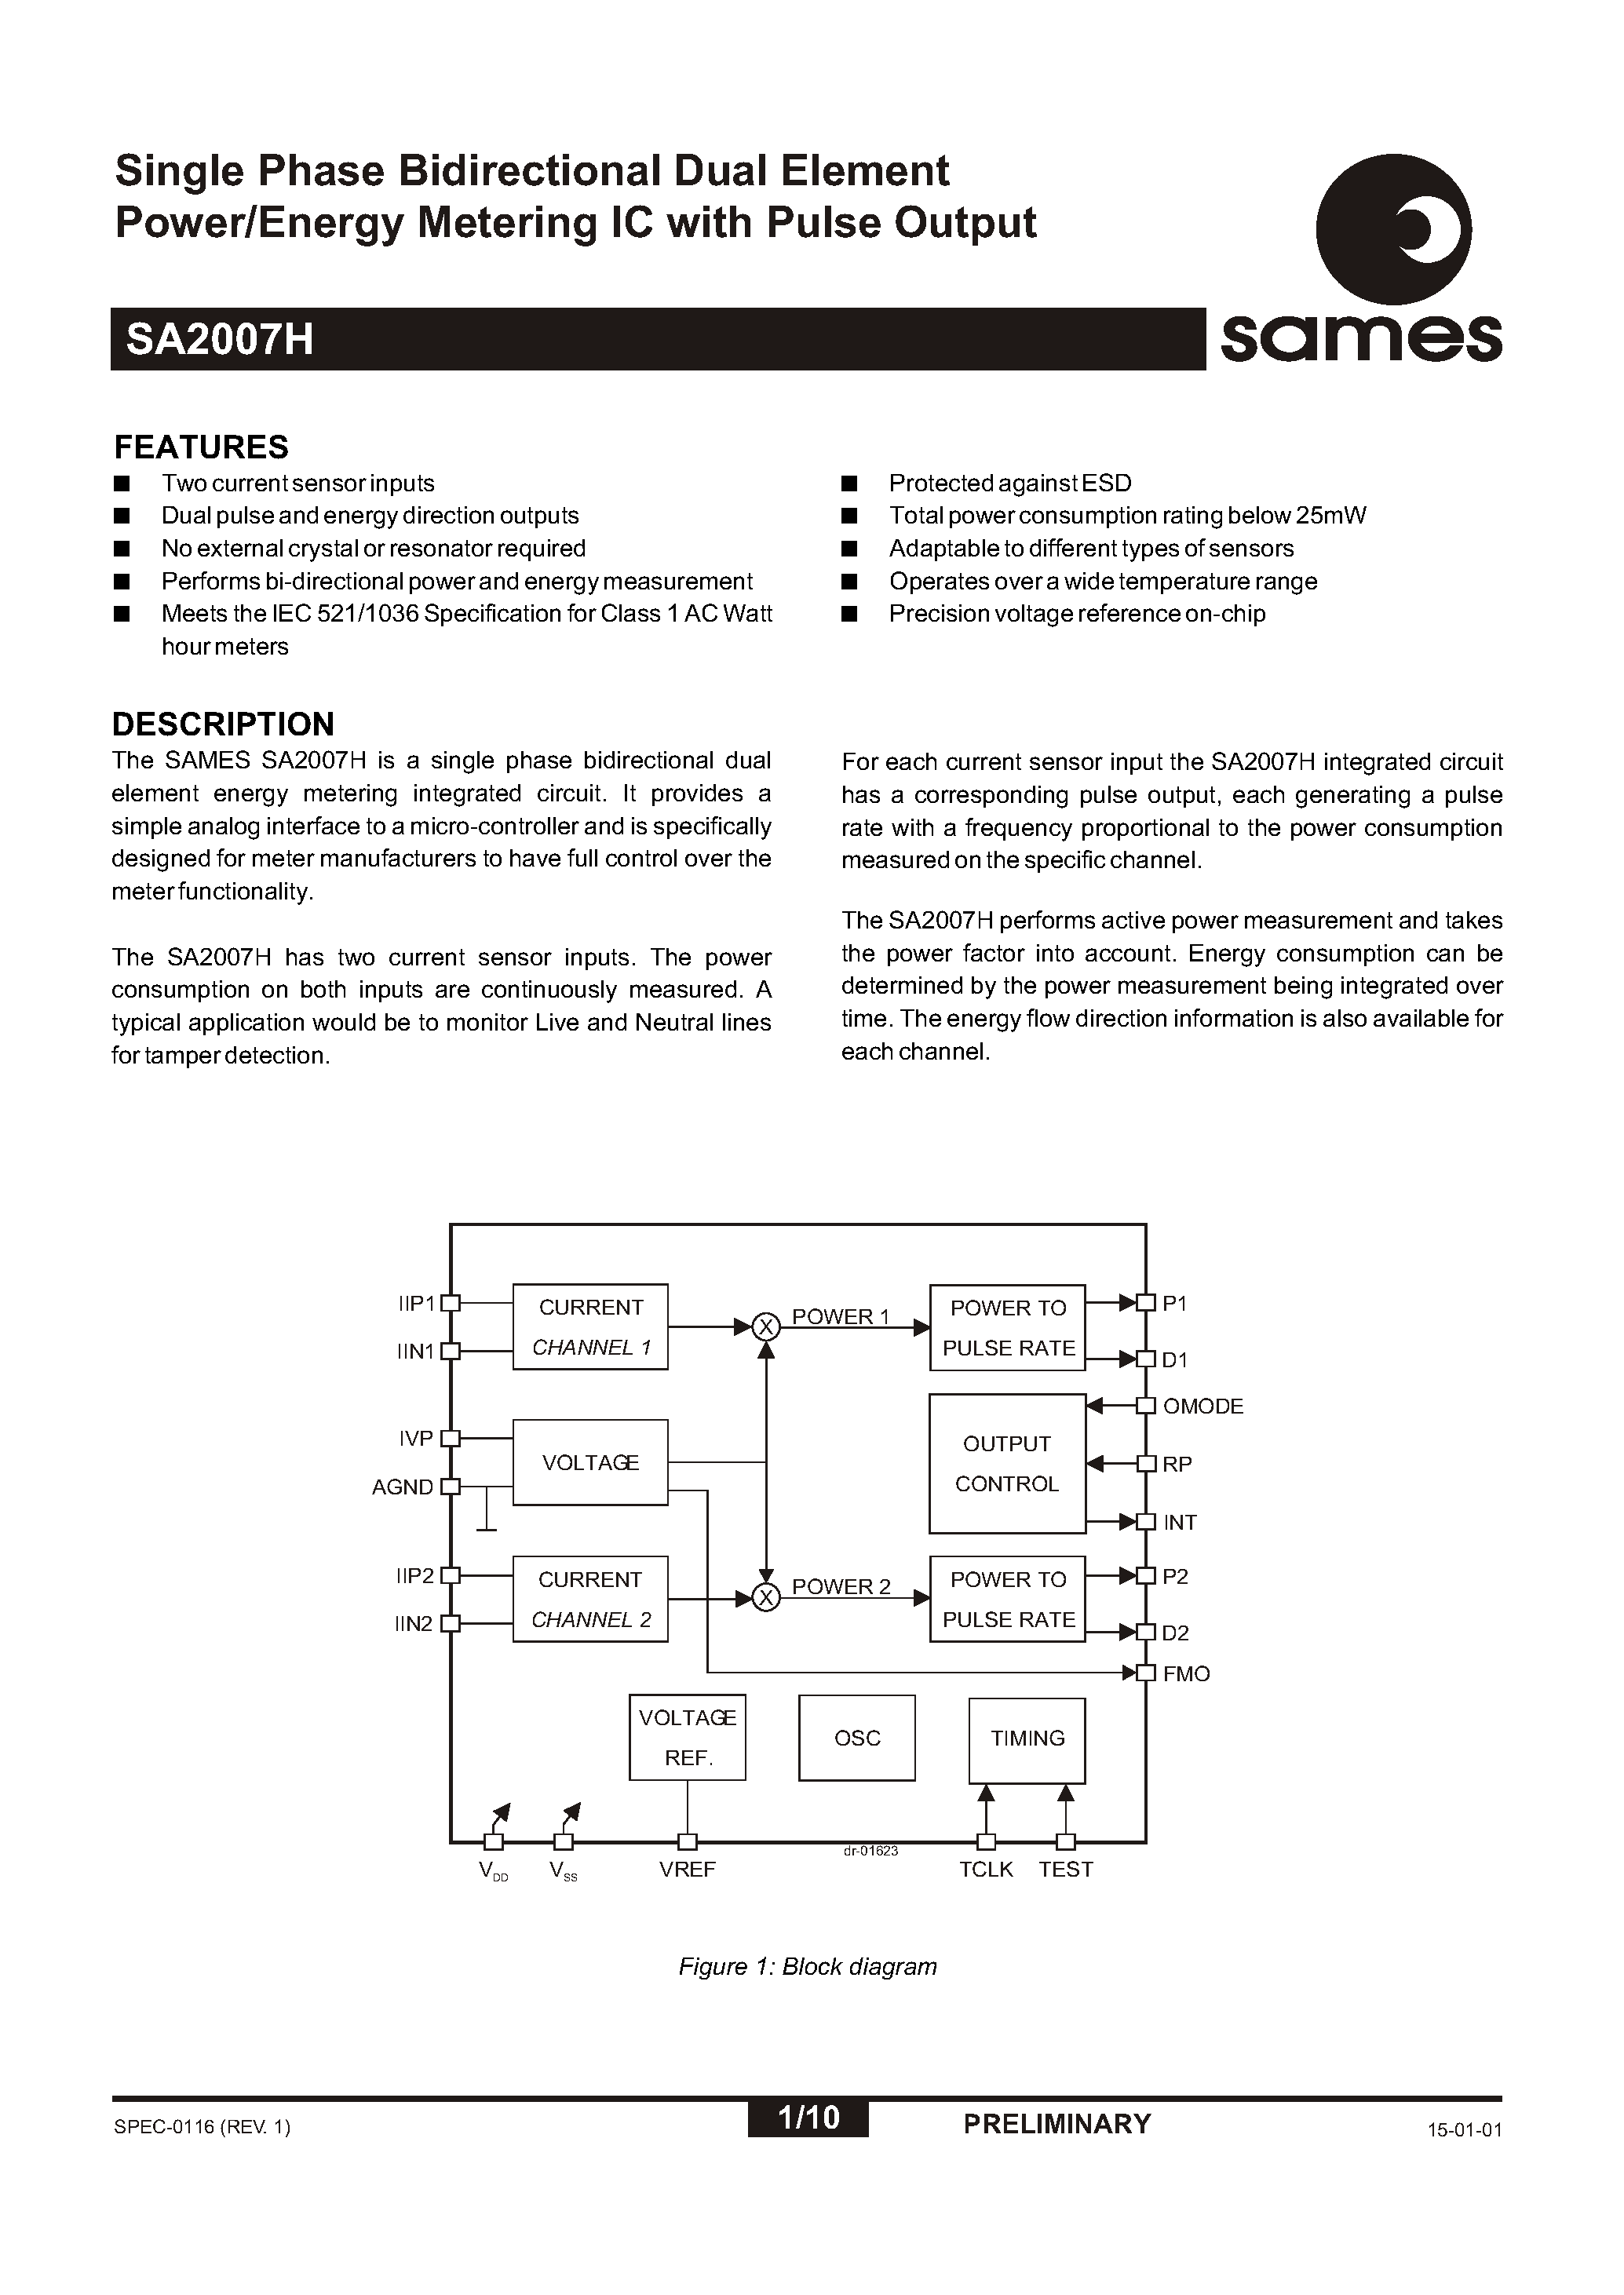 Datasheet SA2007H - Single Phase Bidirectional Dual Element Power/Energy Metering IC with Pulse Output page 1